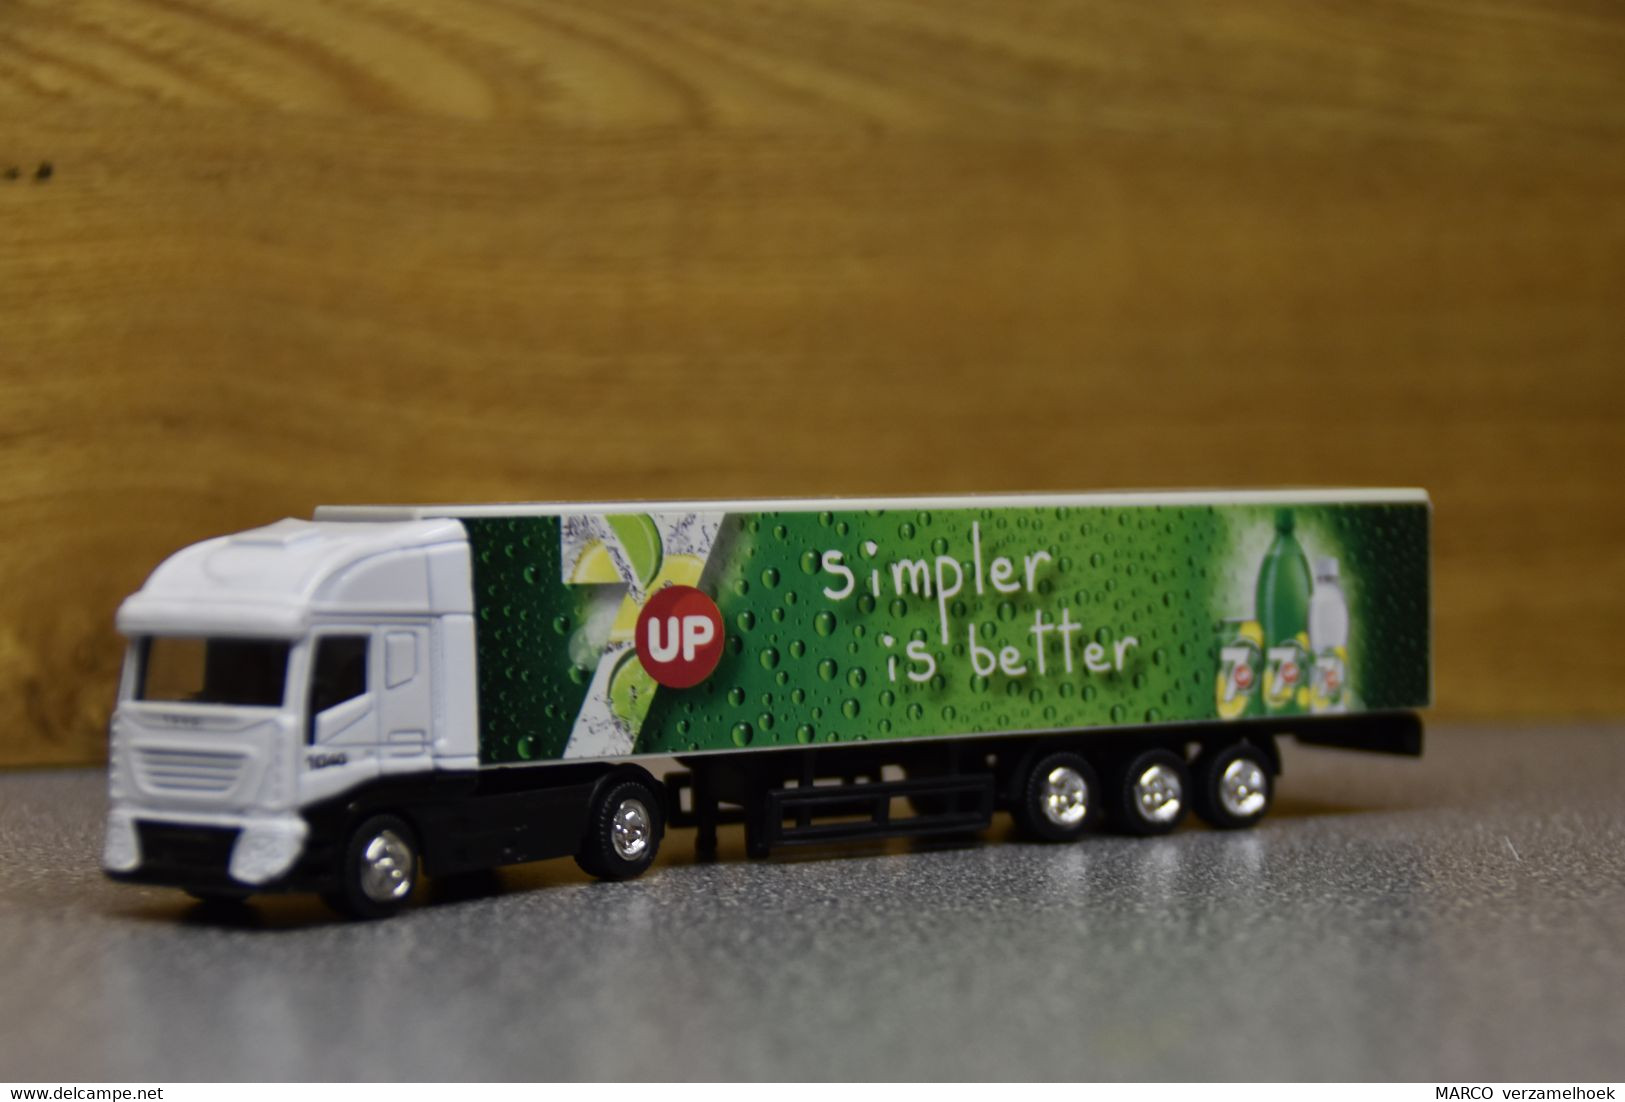 Truck 1040 7up Pepsico-Dr Pepper Snapple Group Scale 1:87 - Massstab 1:87